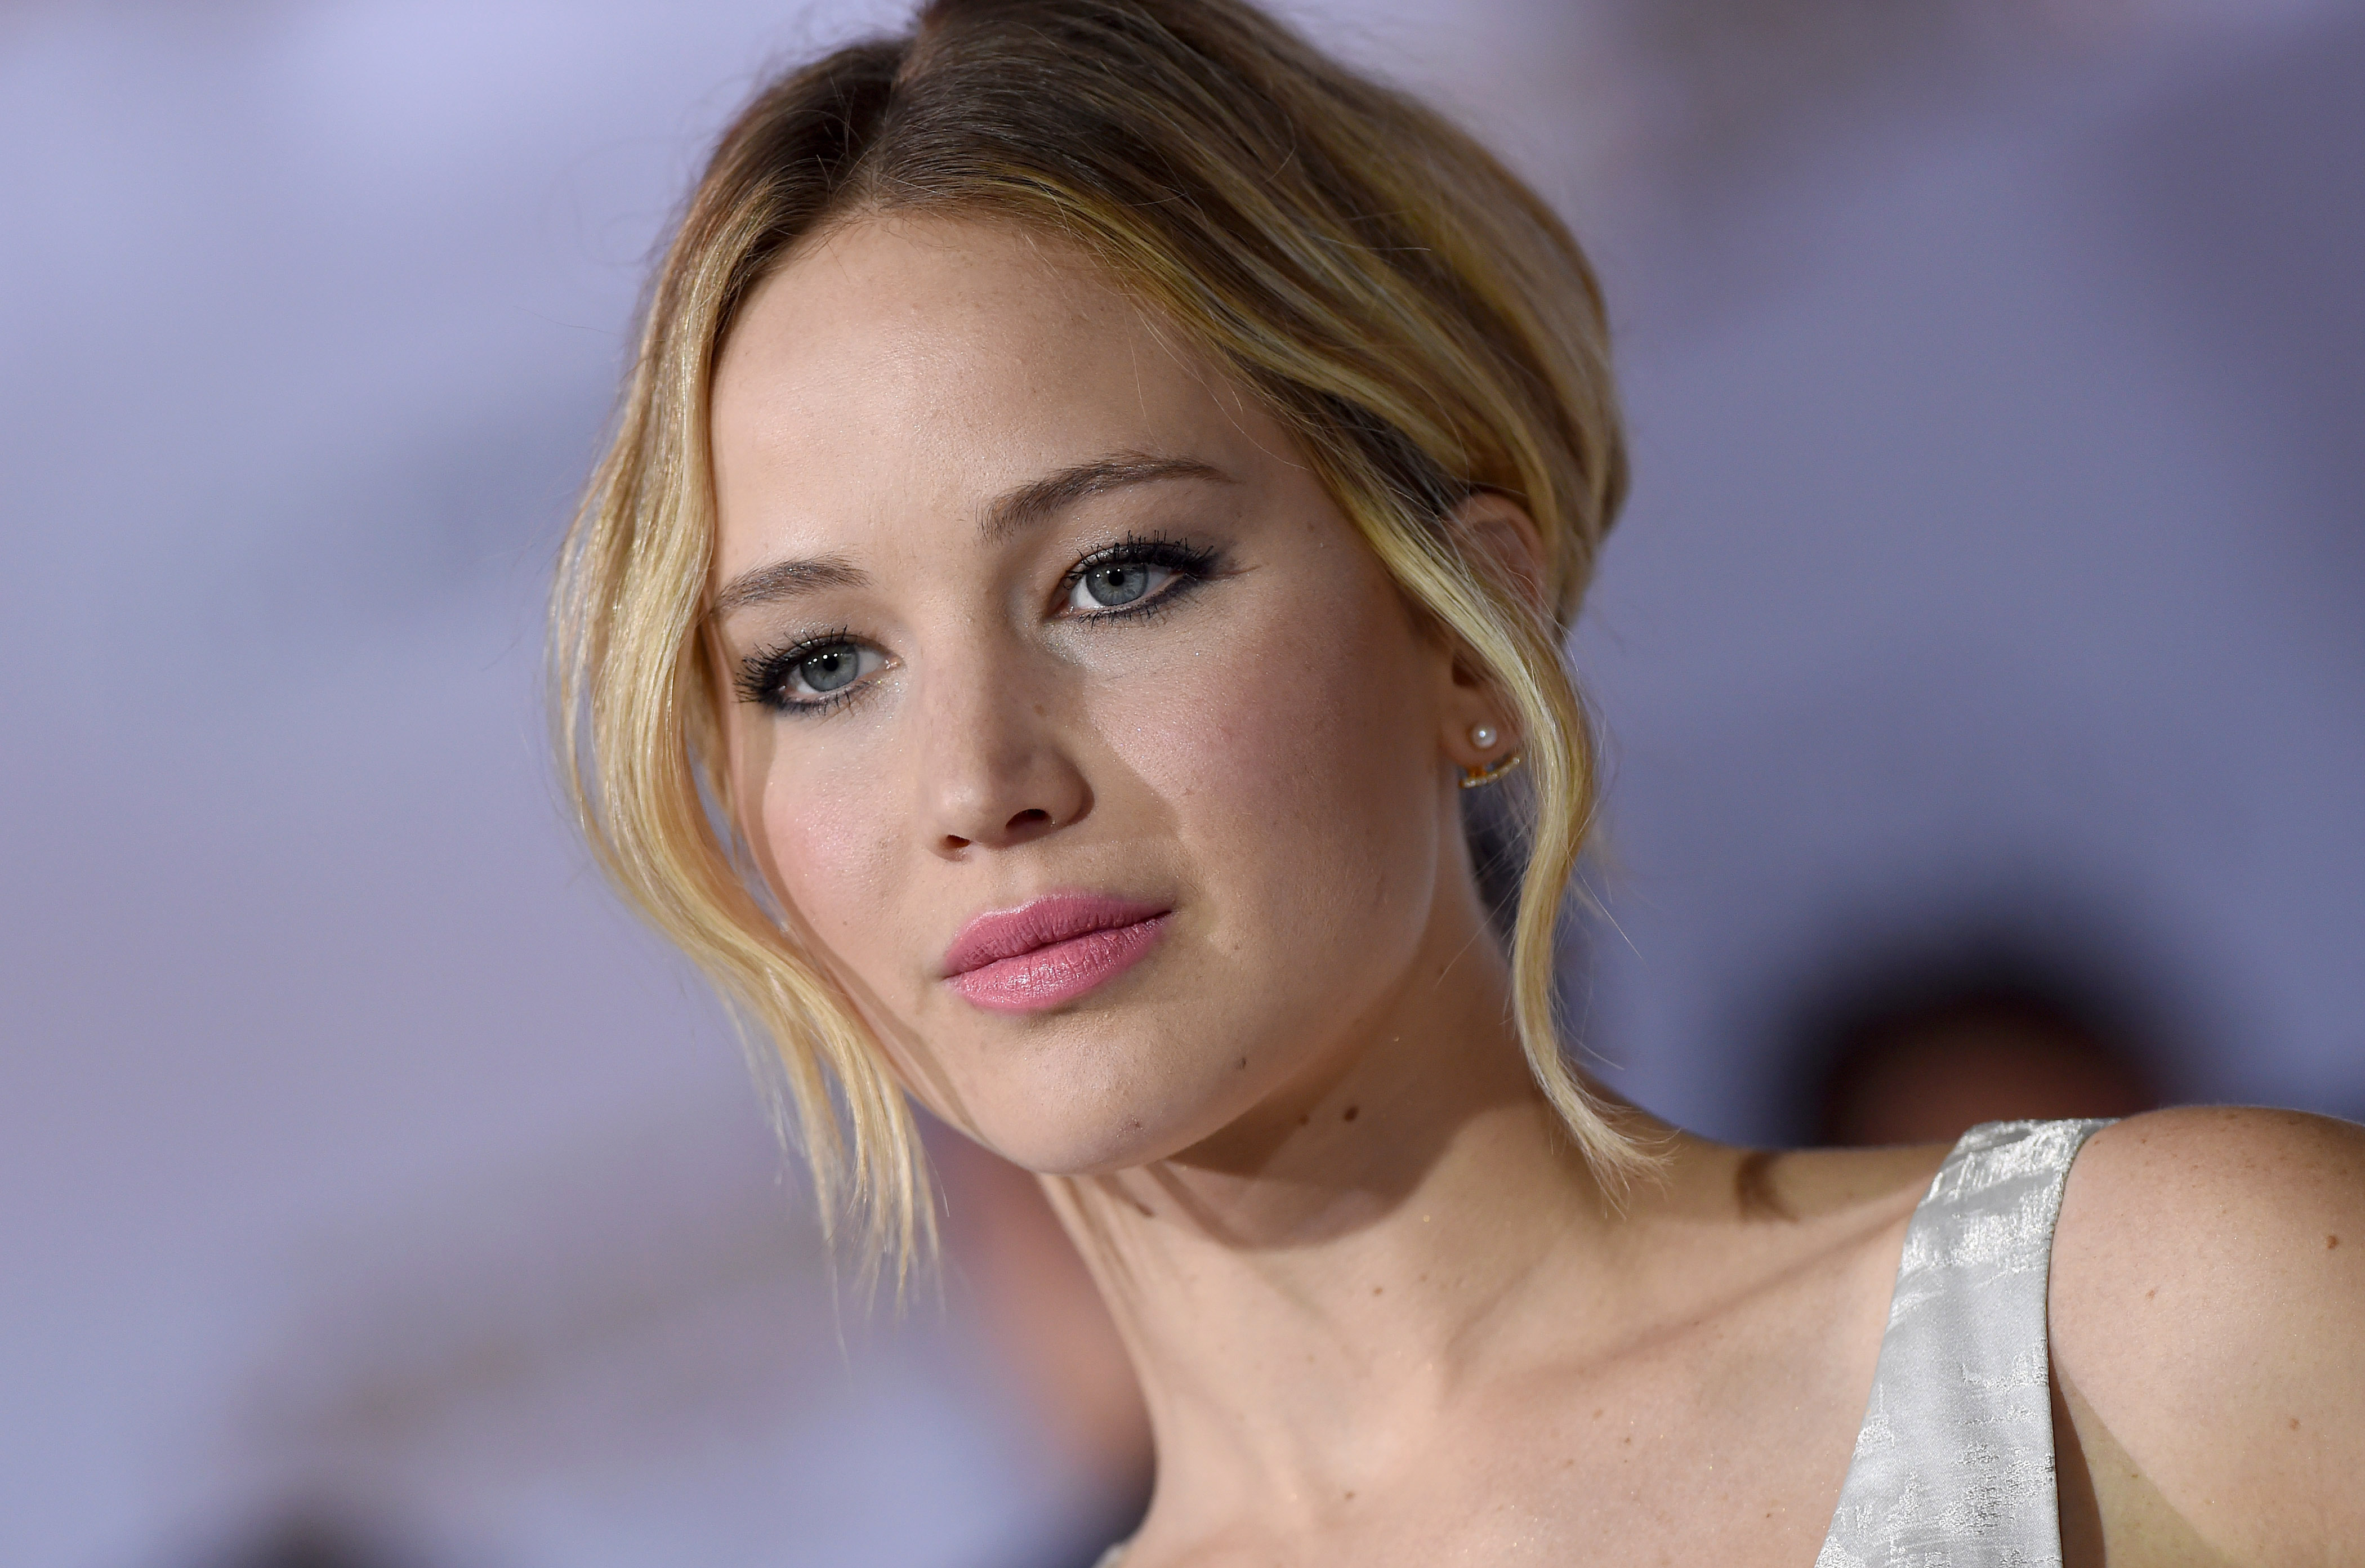 Actress Jennifer Lawrence at the Los Angeles premiere of <i>The Hunger Games: Mockingjay - Part 1</i>   on November 17, 2014 in Los Angeles, California.  (Photo by Axelle/Bauer-Griffin/FilmMagic)